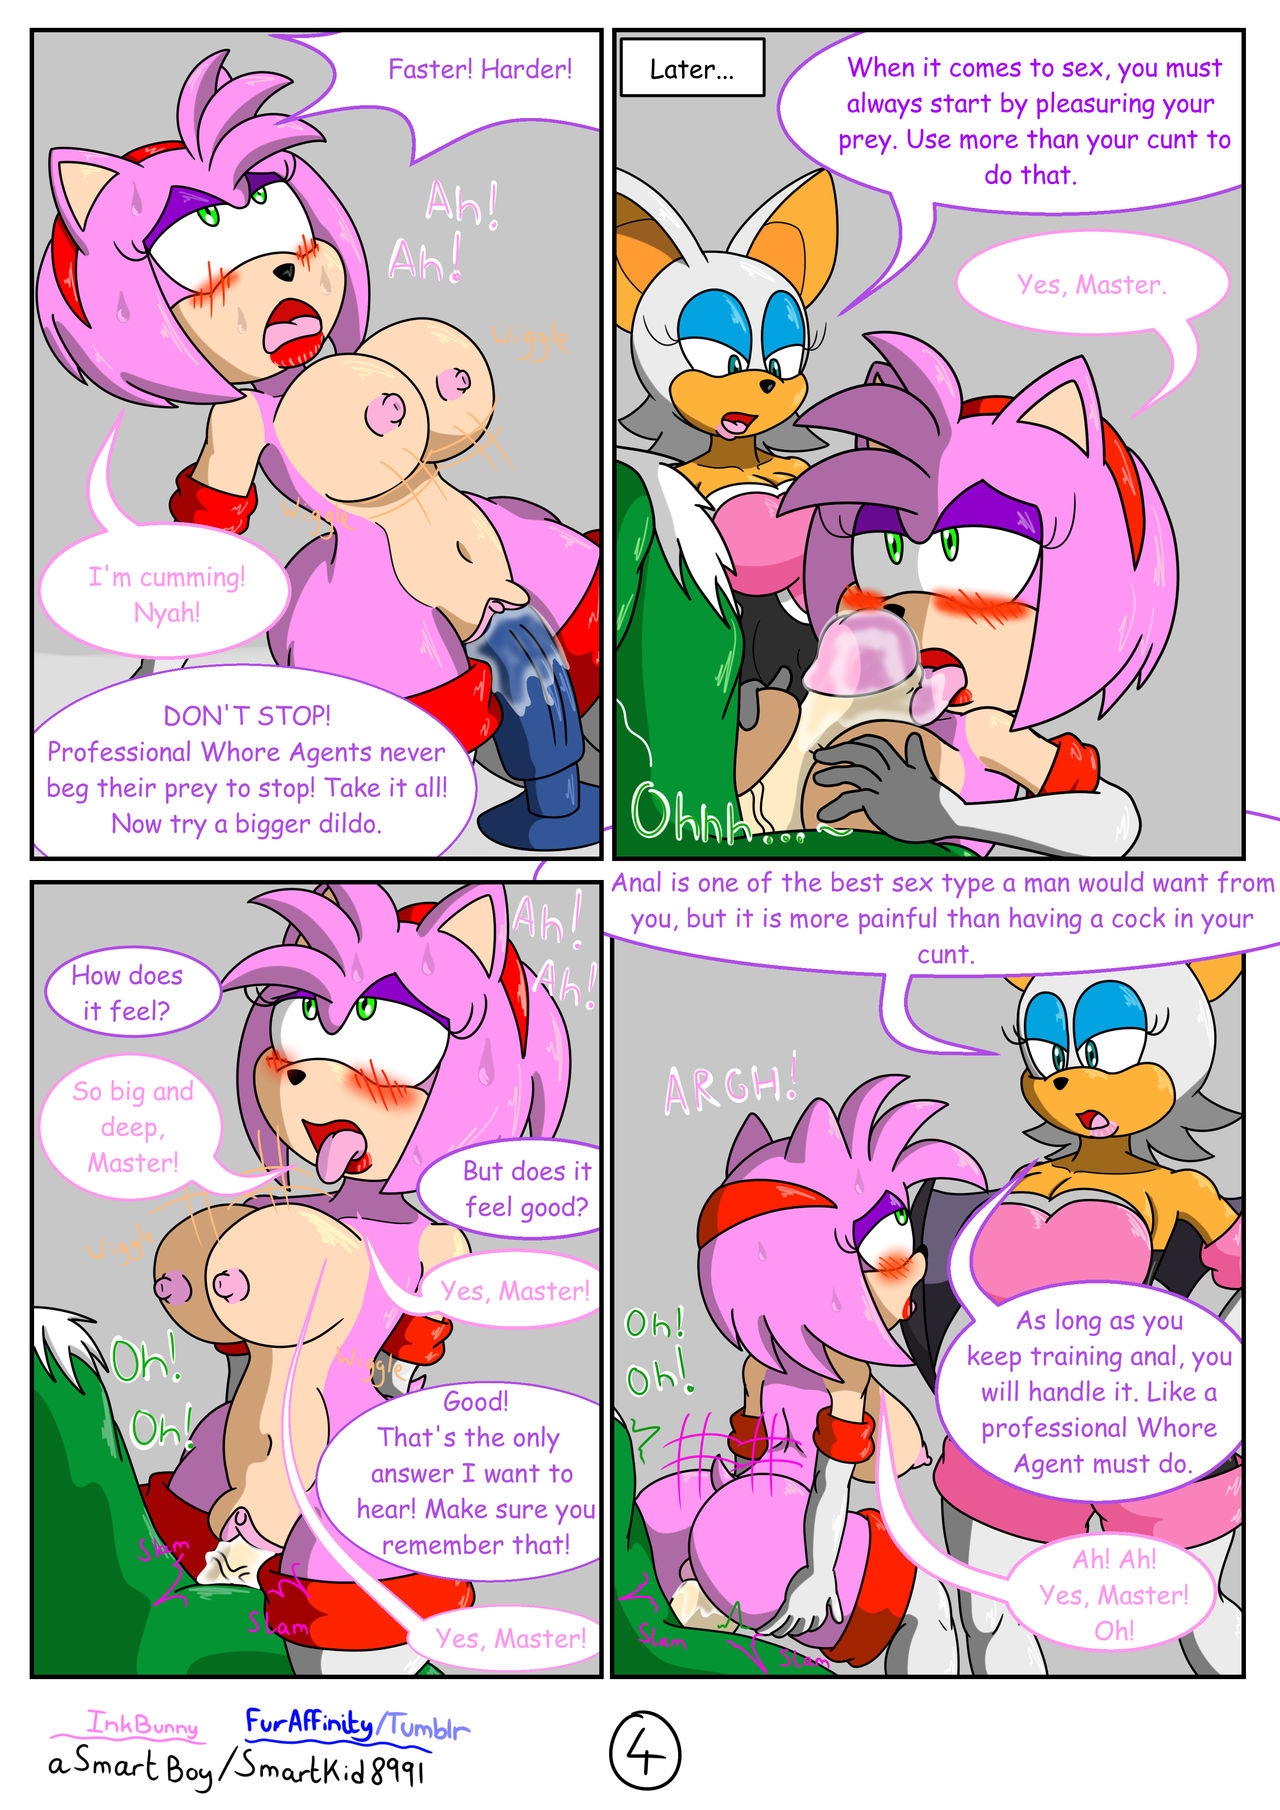 [SmartKid8991] Agent Whore Bootcamp (Sonic The Hedgehog) [Ongoing] 4